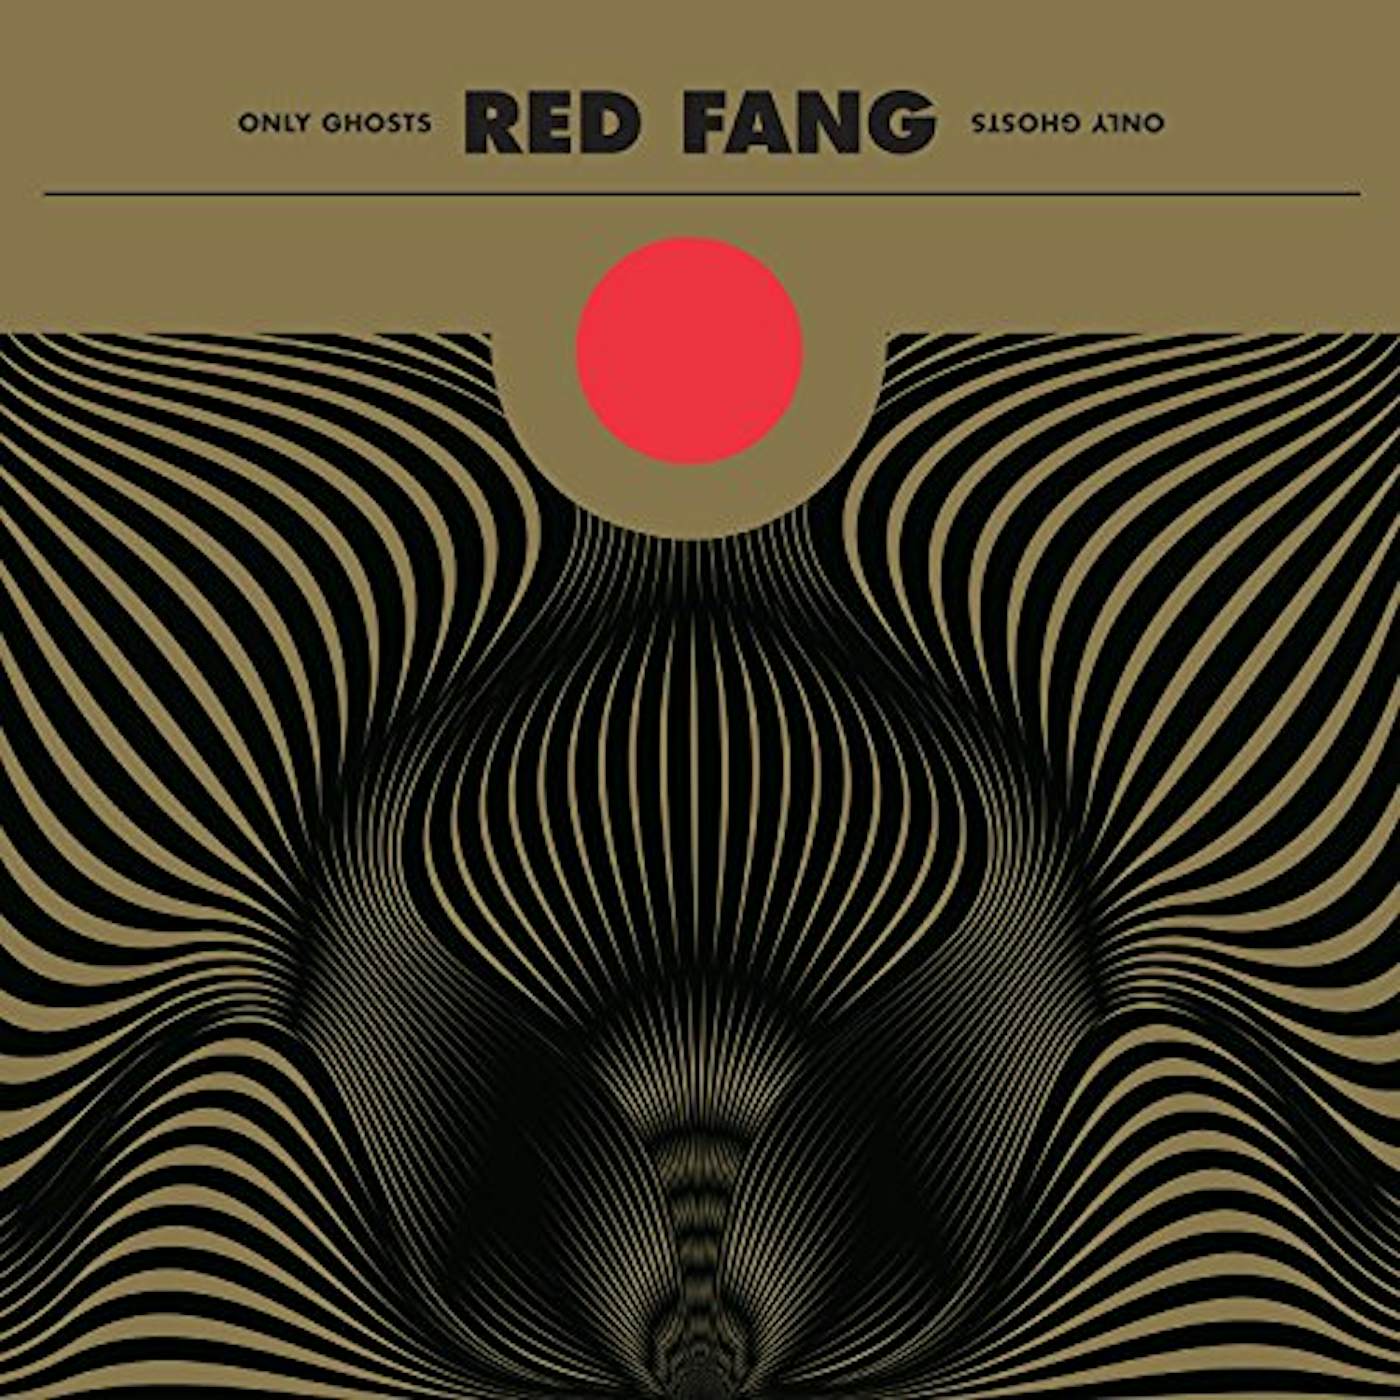 Red Fang ONLY GHOSTS CD